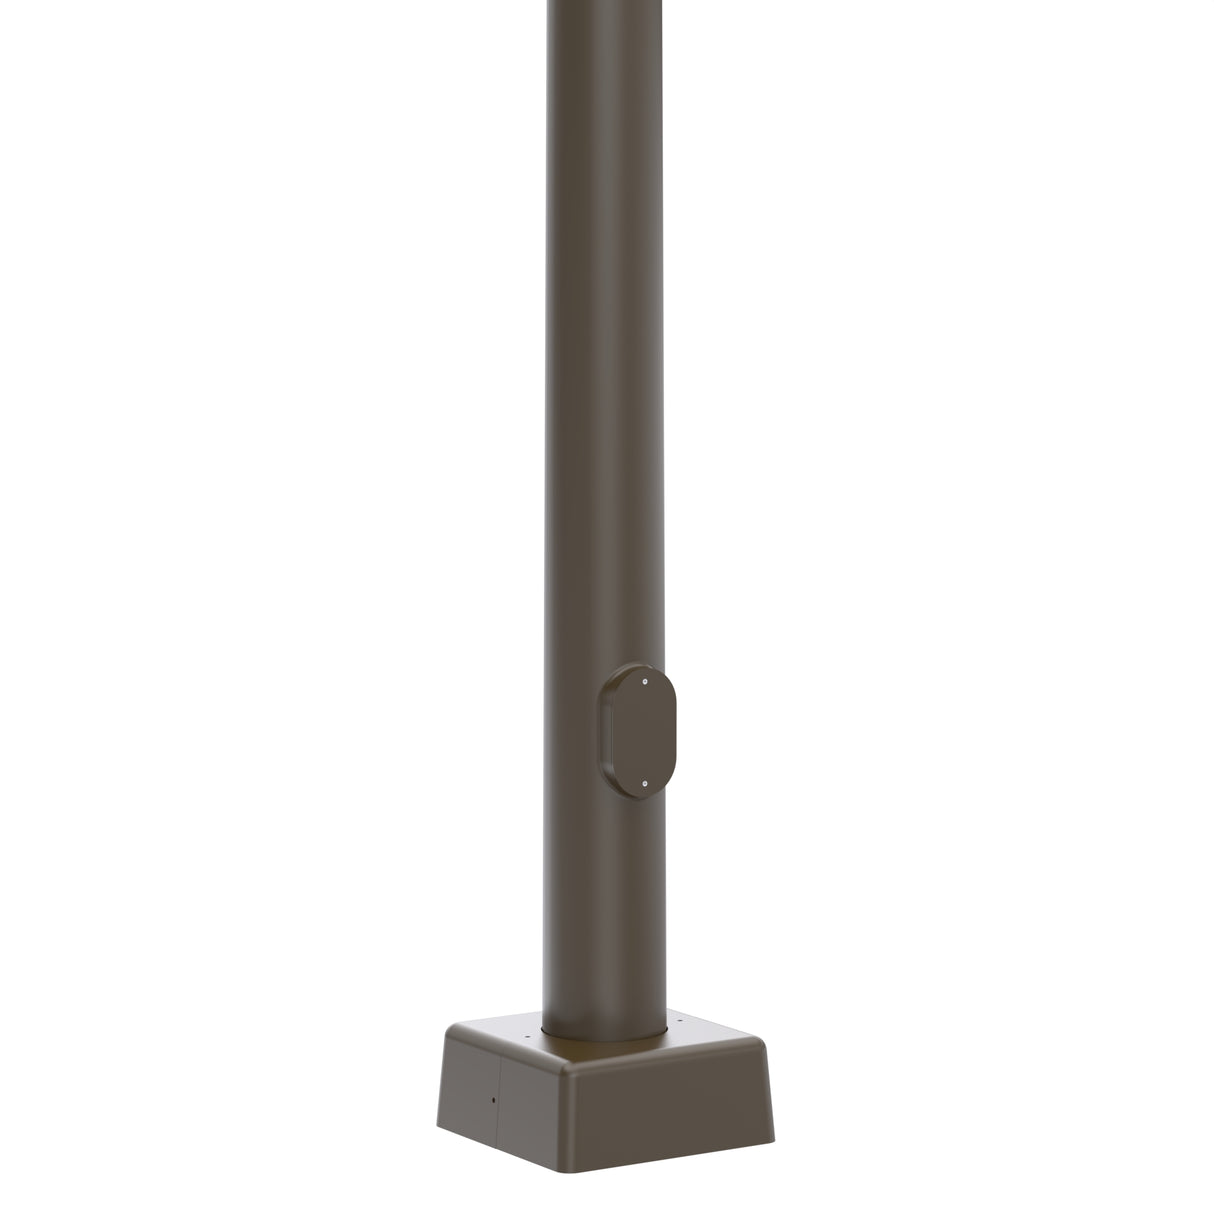 60' Tall x 13" Base OD x 4.8" Top OD x 7 & 11ga Thick, Round Tapered Steel, Anchor Base Light Pole